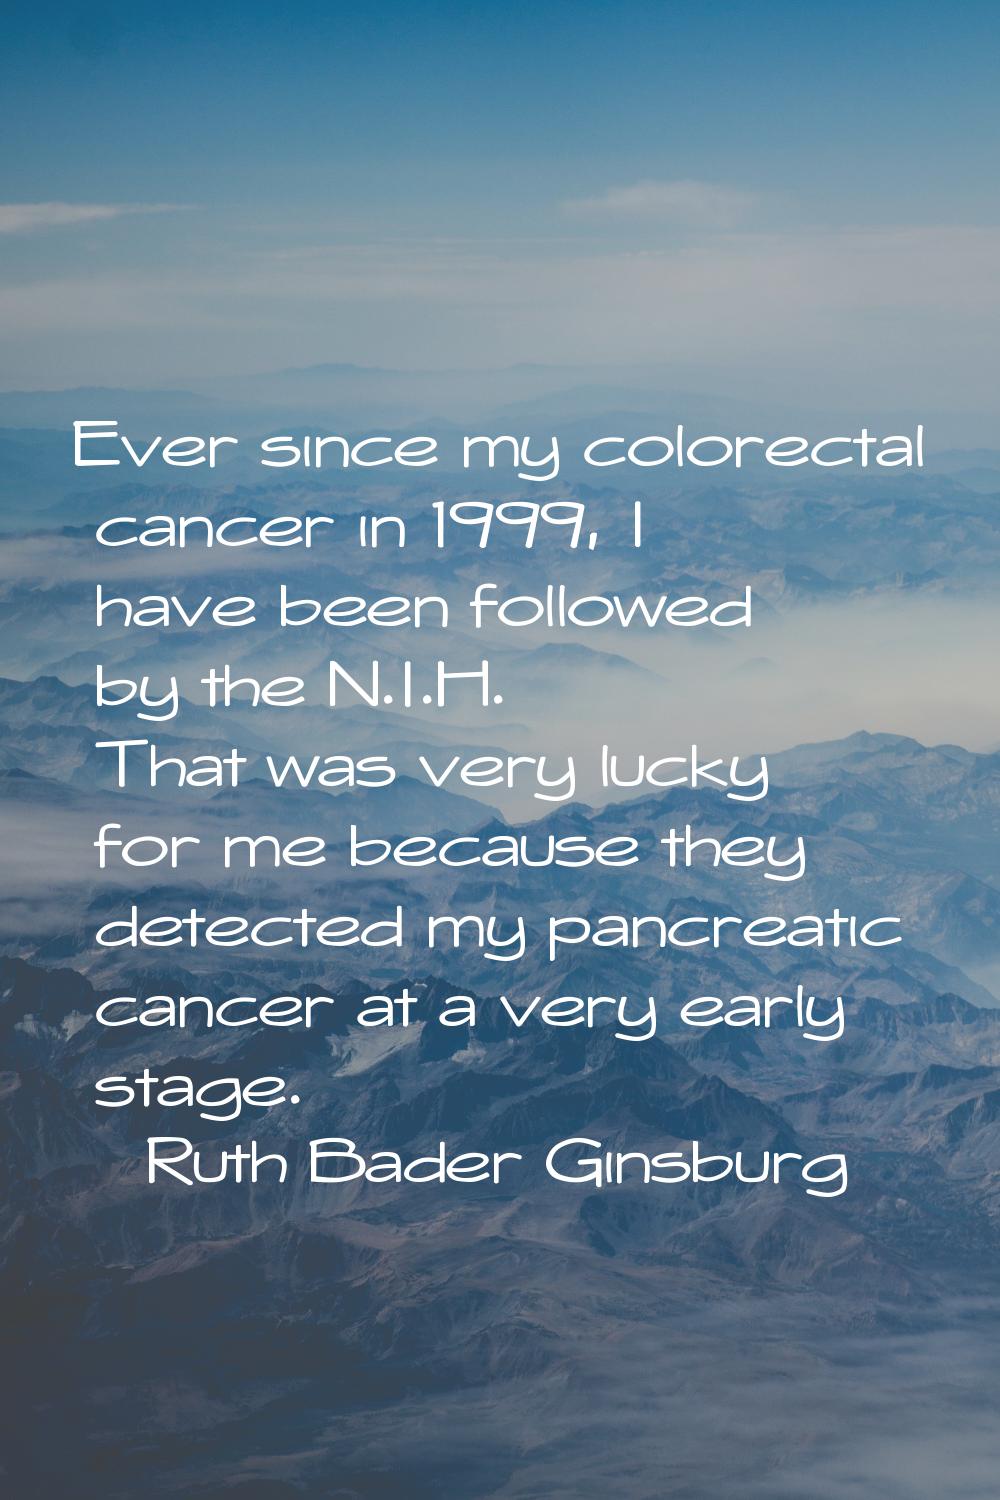 Ever since my colorectal cancer in 1999, I have been followed by the N.I.H. That was very lucky for